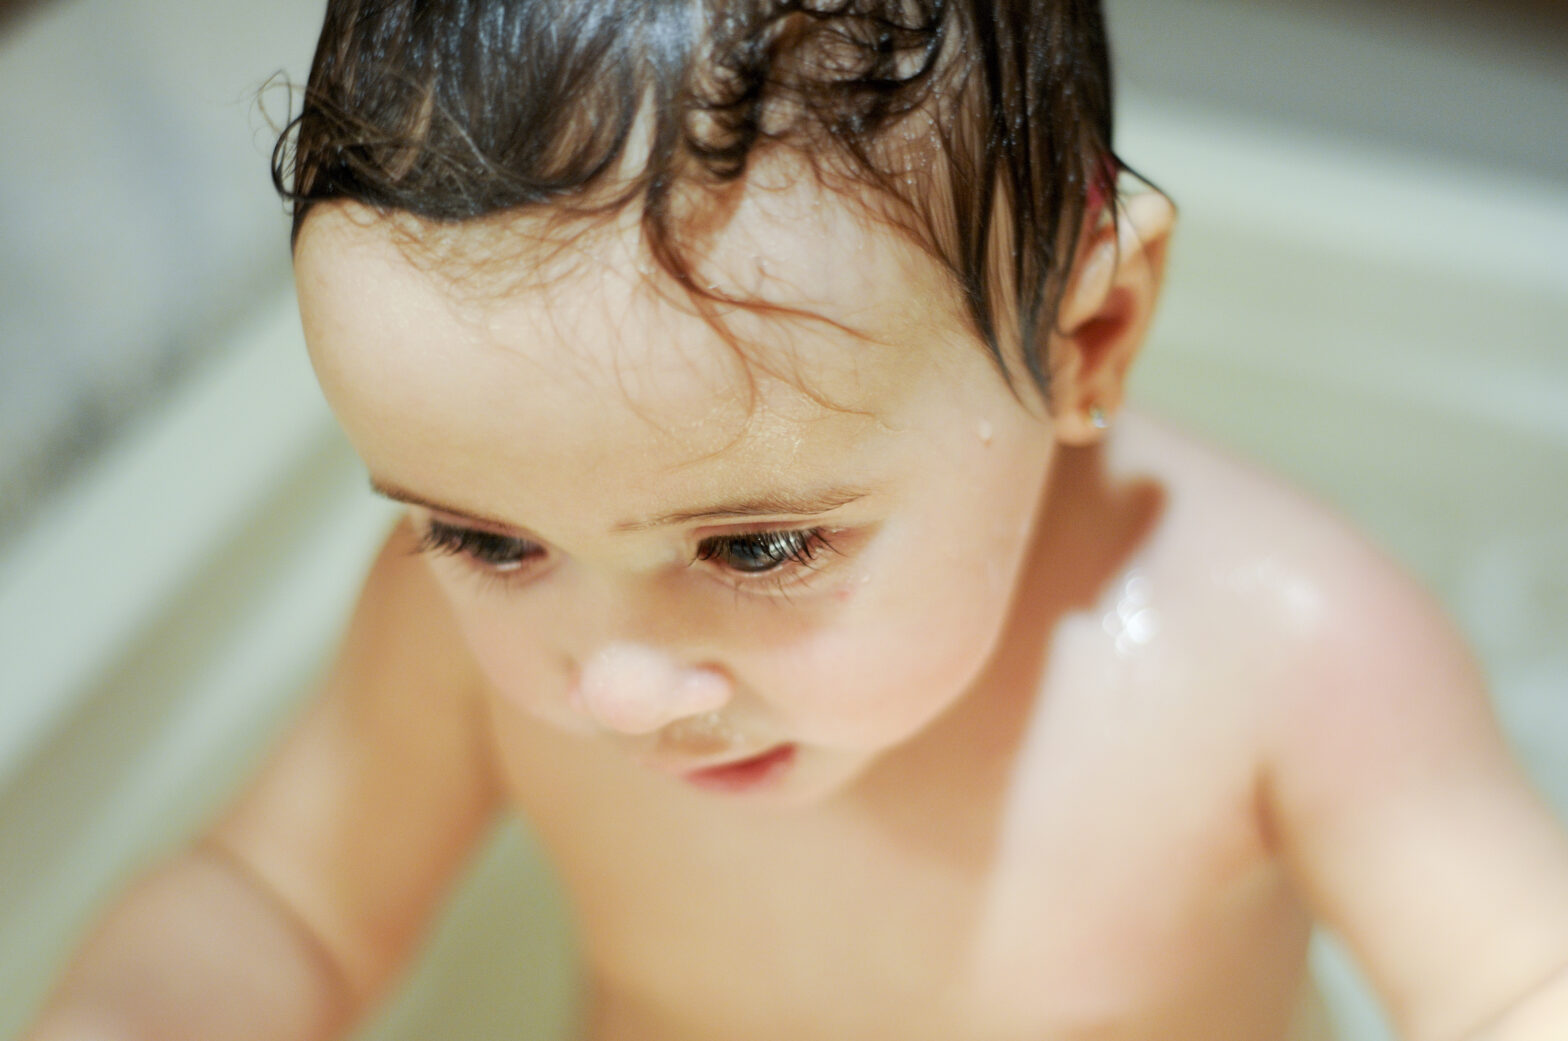 Best Pediatrician in Faridabad provides the tips for Bathing an Infant